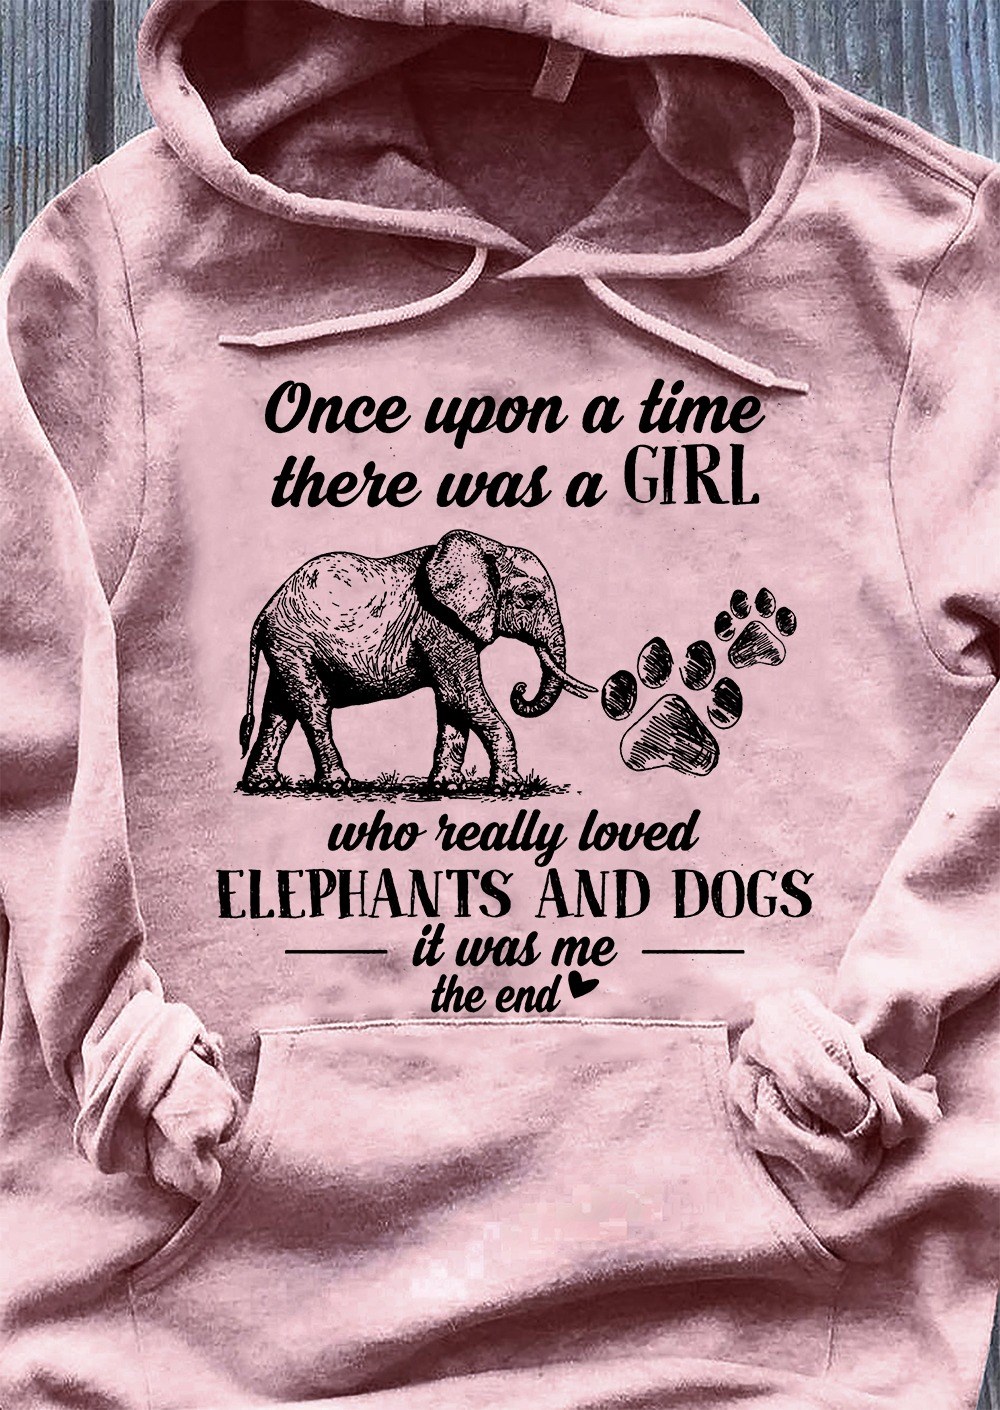 once upon a time there was a girl who really loved elephants and dogs. it was me the end